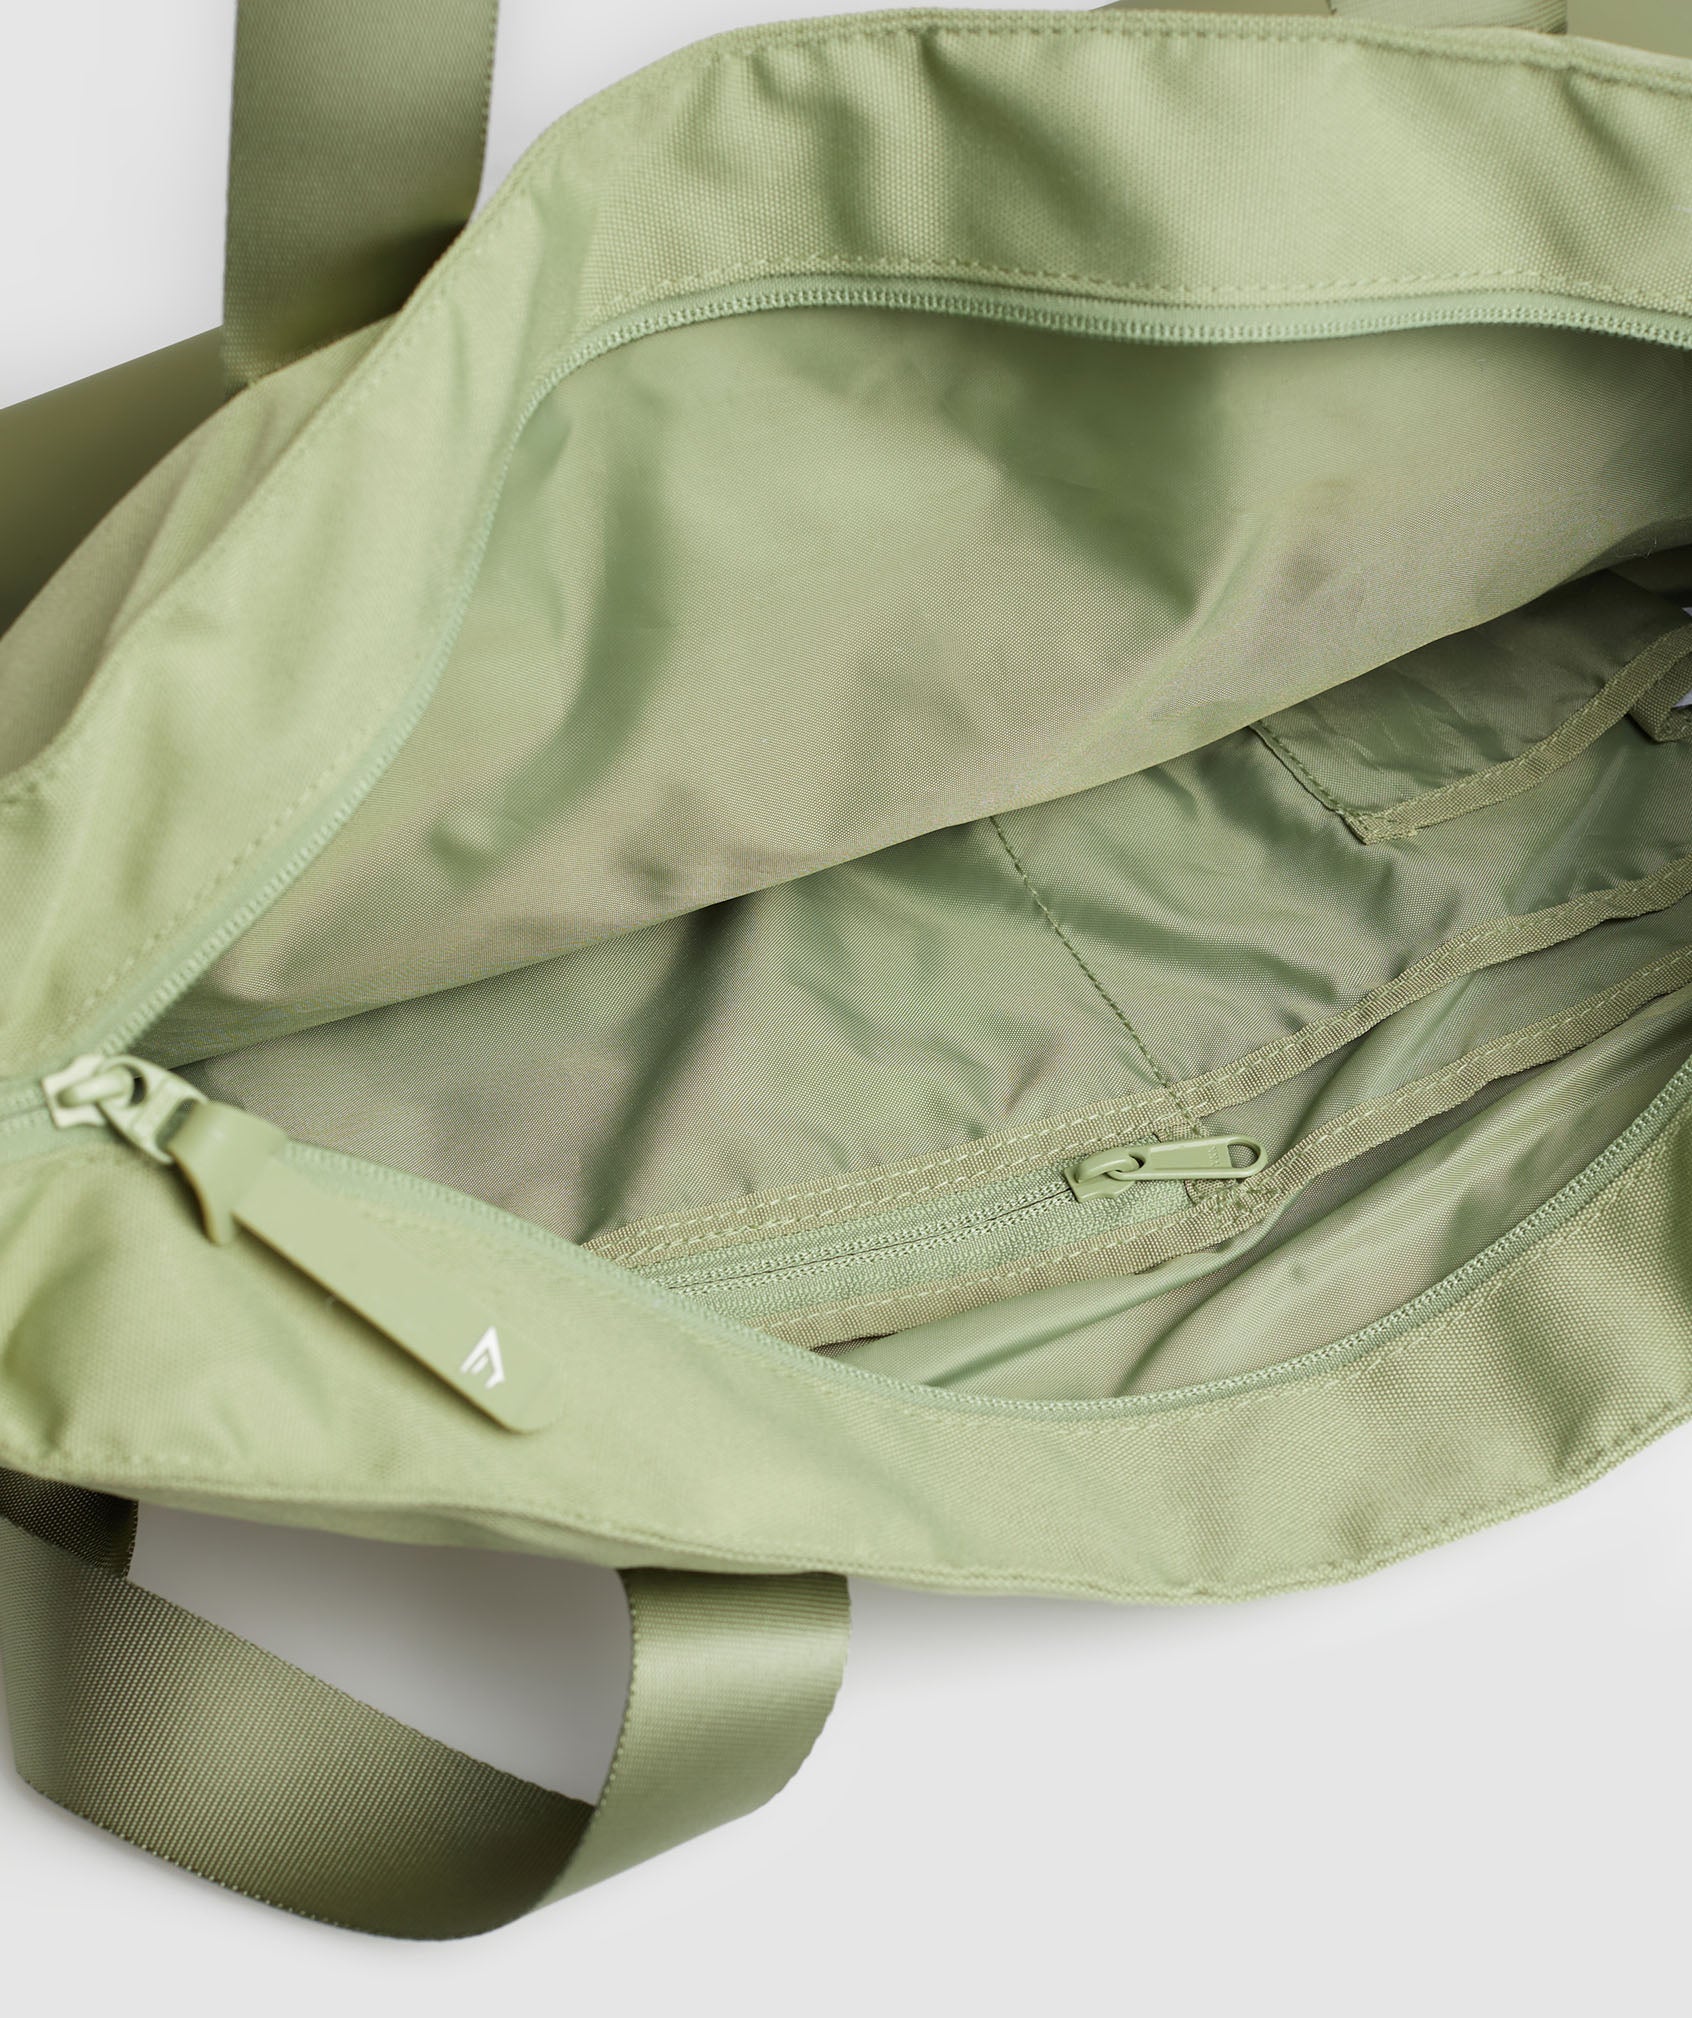 Everyday Tote in Natural Sage Green - view 4